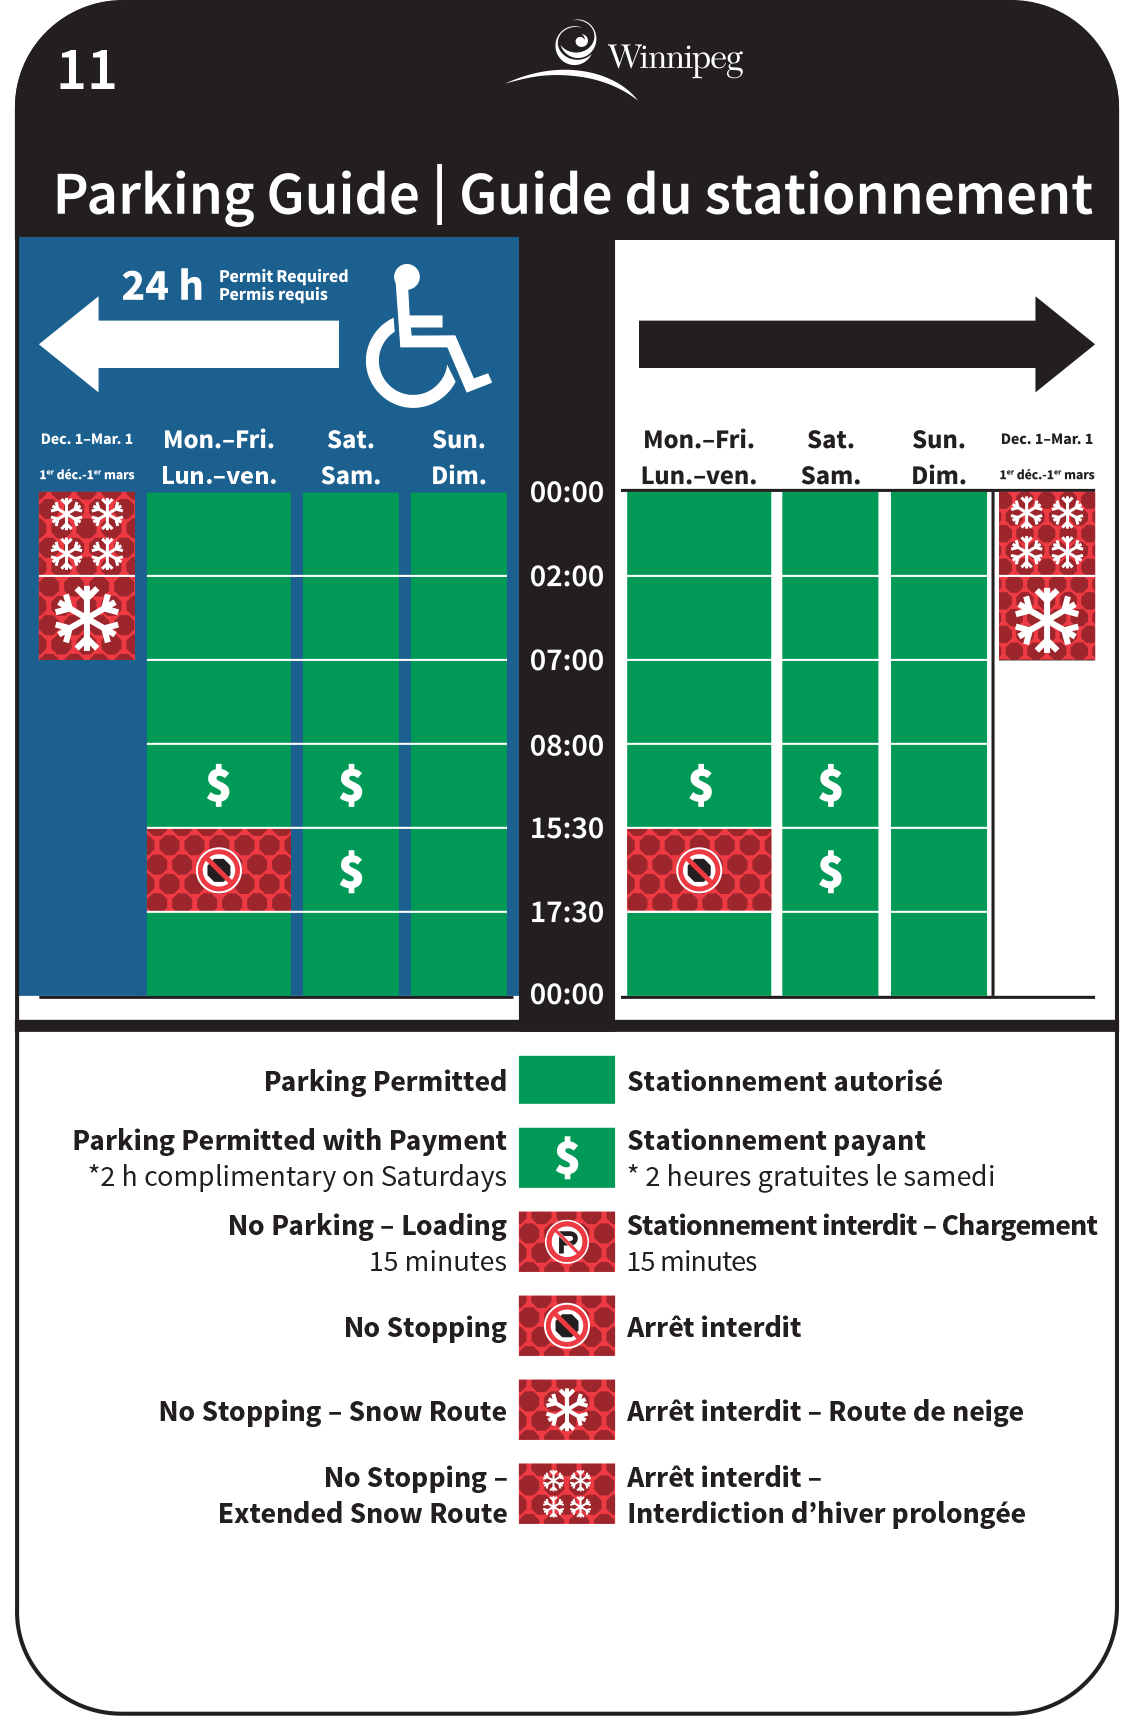 New parking guide design with clearer layouts, text, and graphics